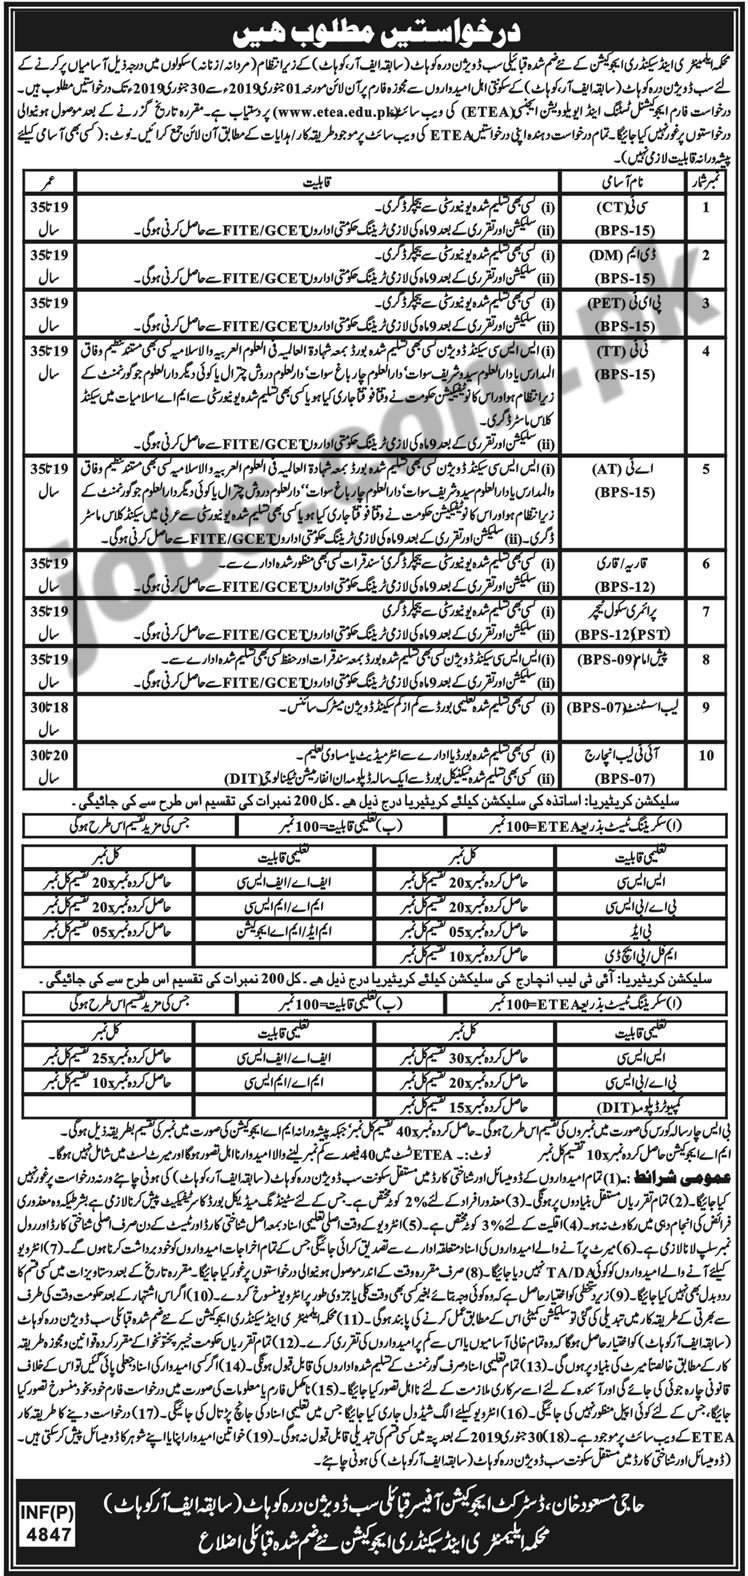 Elementary & Secondary Education Department KP (Kohat) Jobs 2019 for Teachers, CT, DM, AT, TT, IT and Other Posts